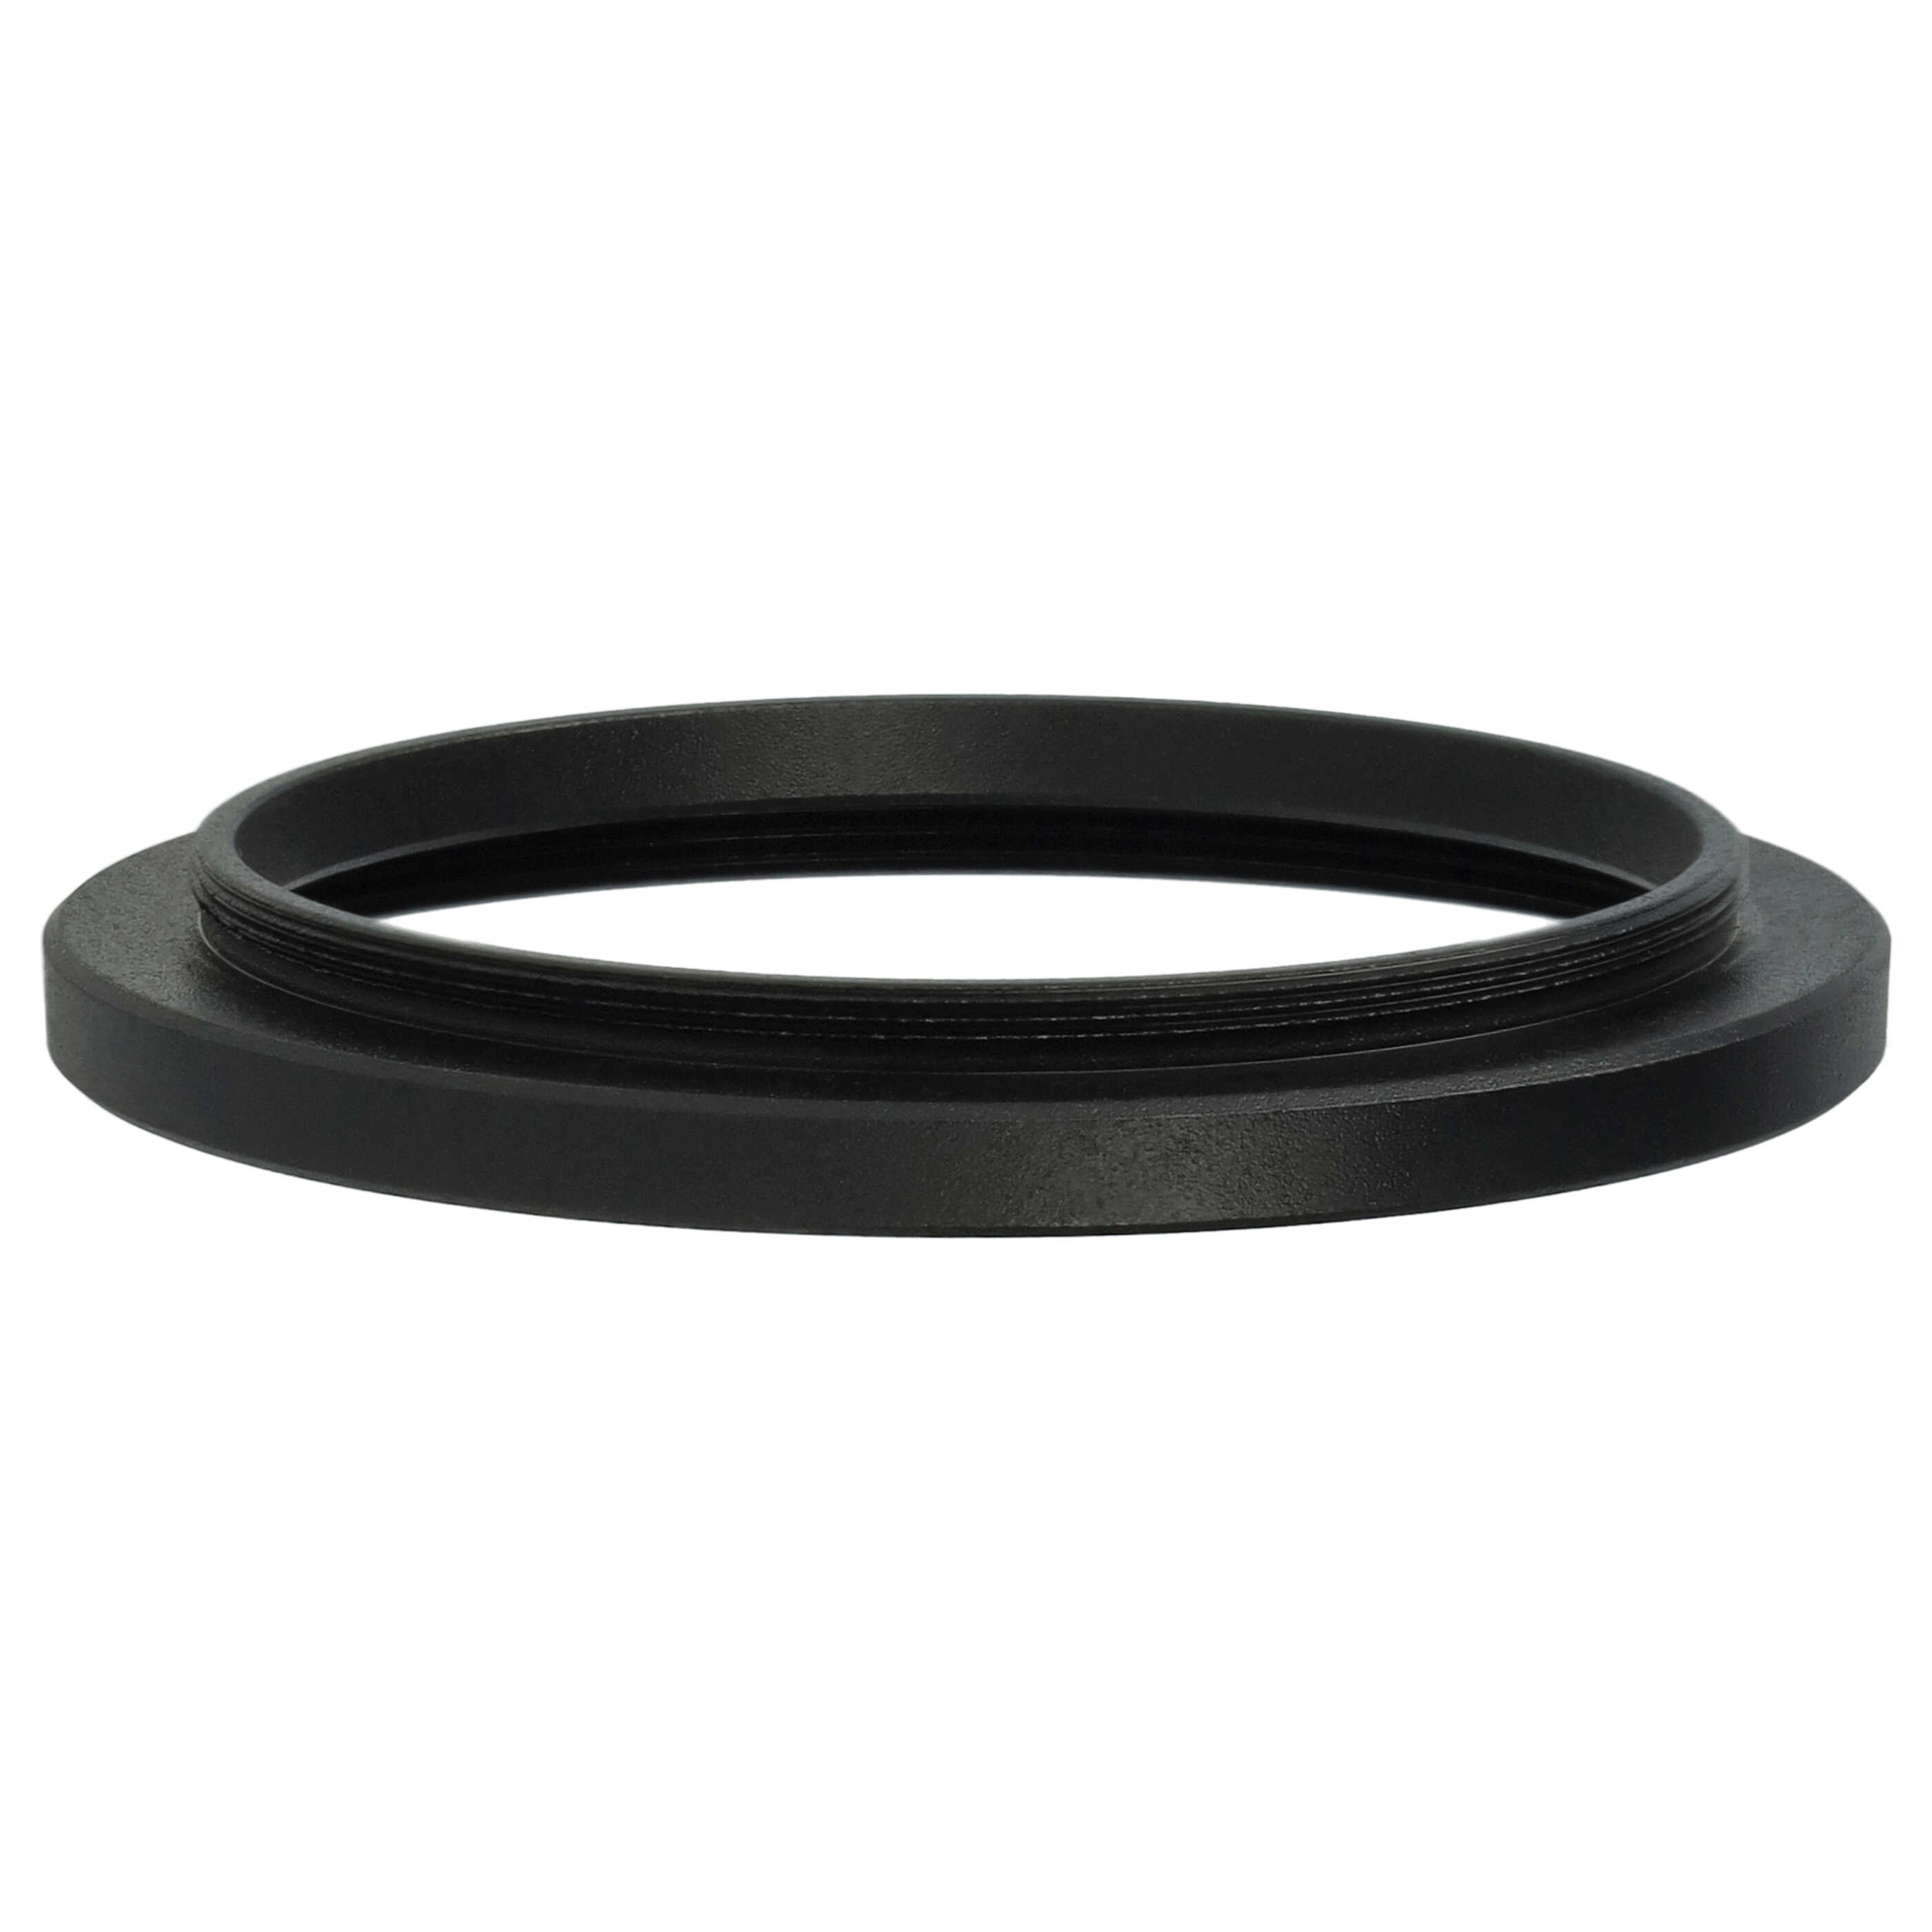 Step-Up Ring Adapter of 43.5 mm to 49 mmfor various Camera Lens - Filter Adapter